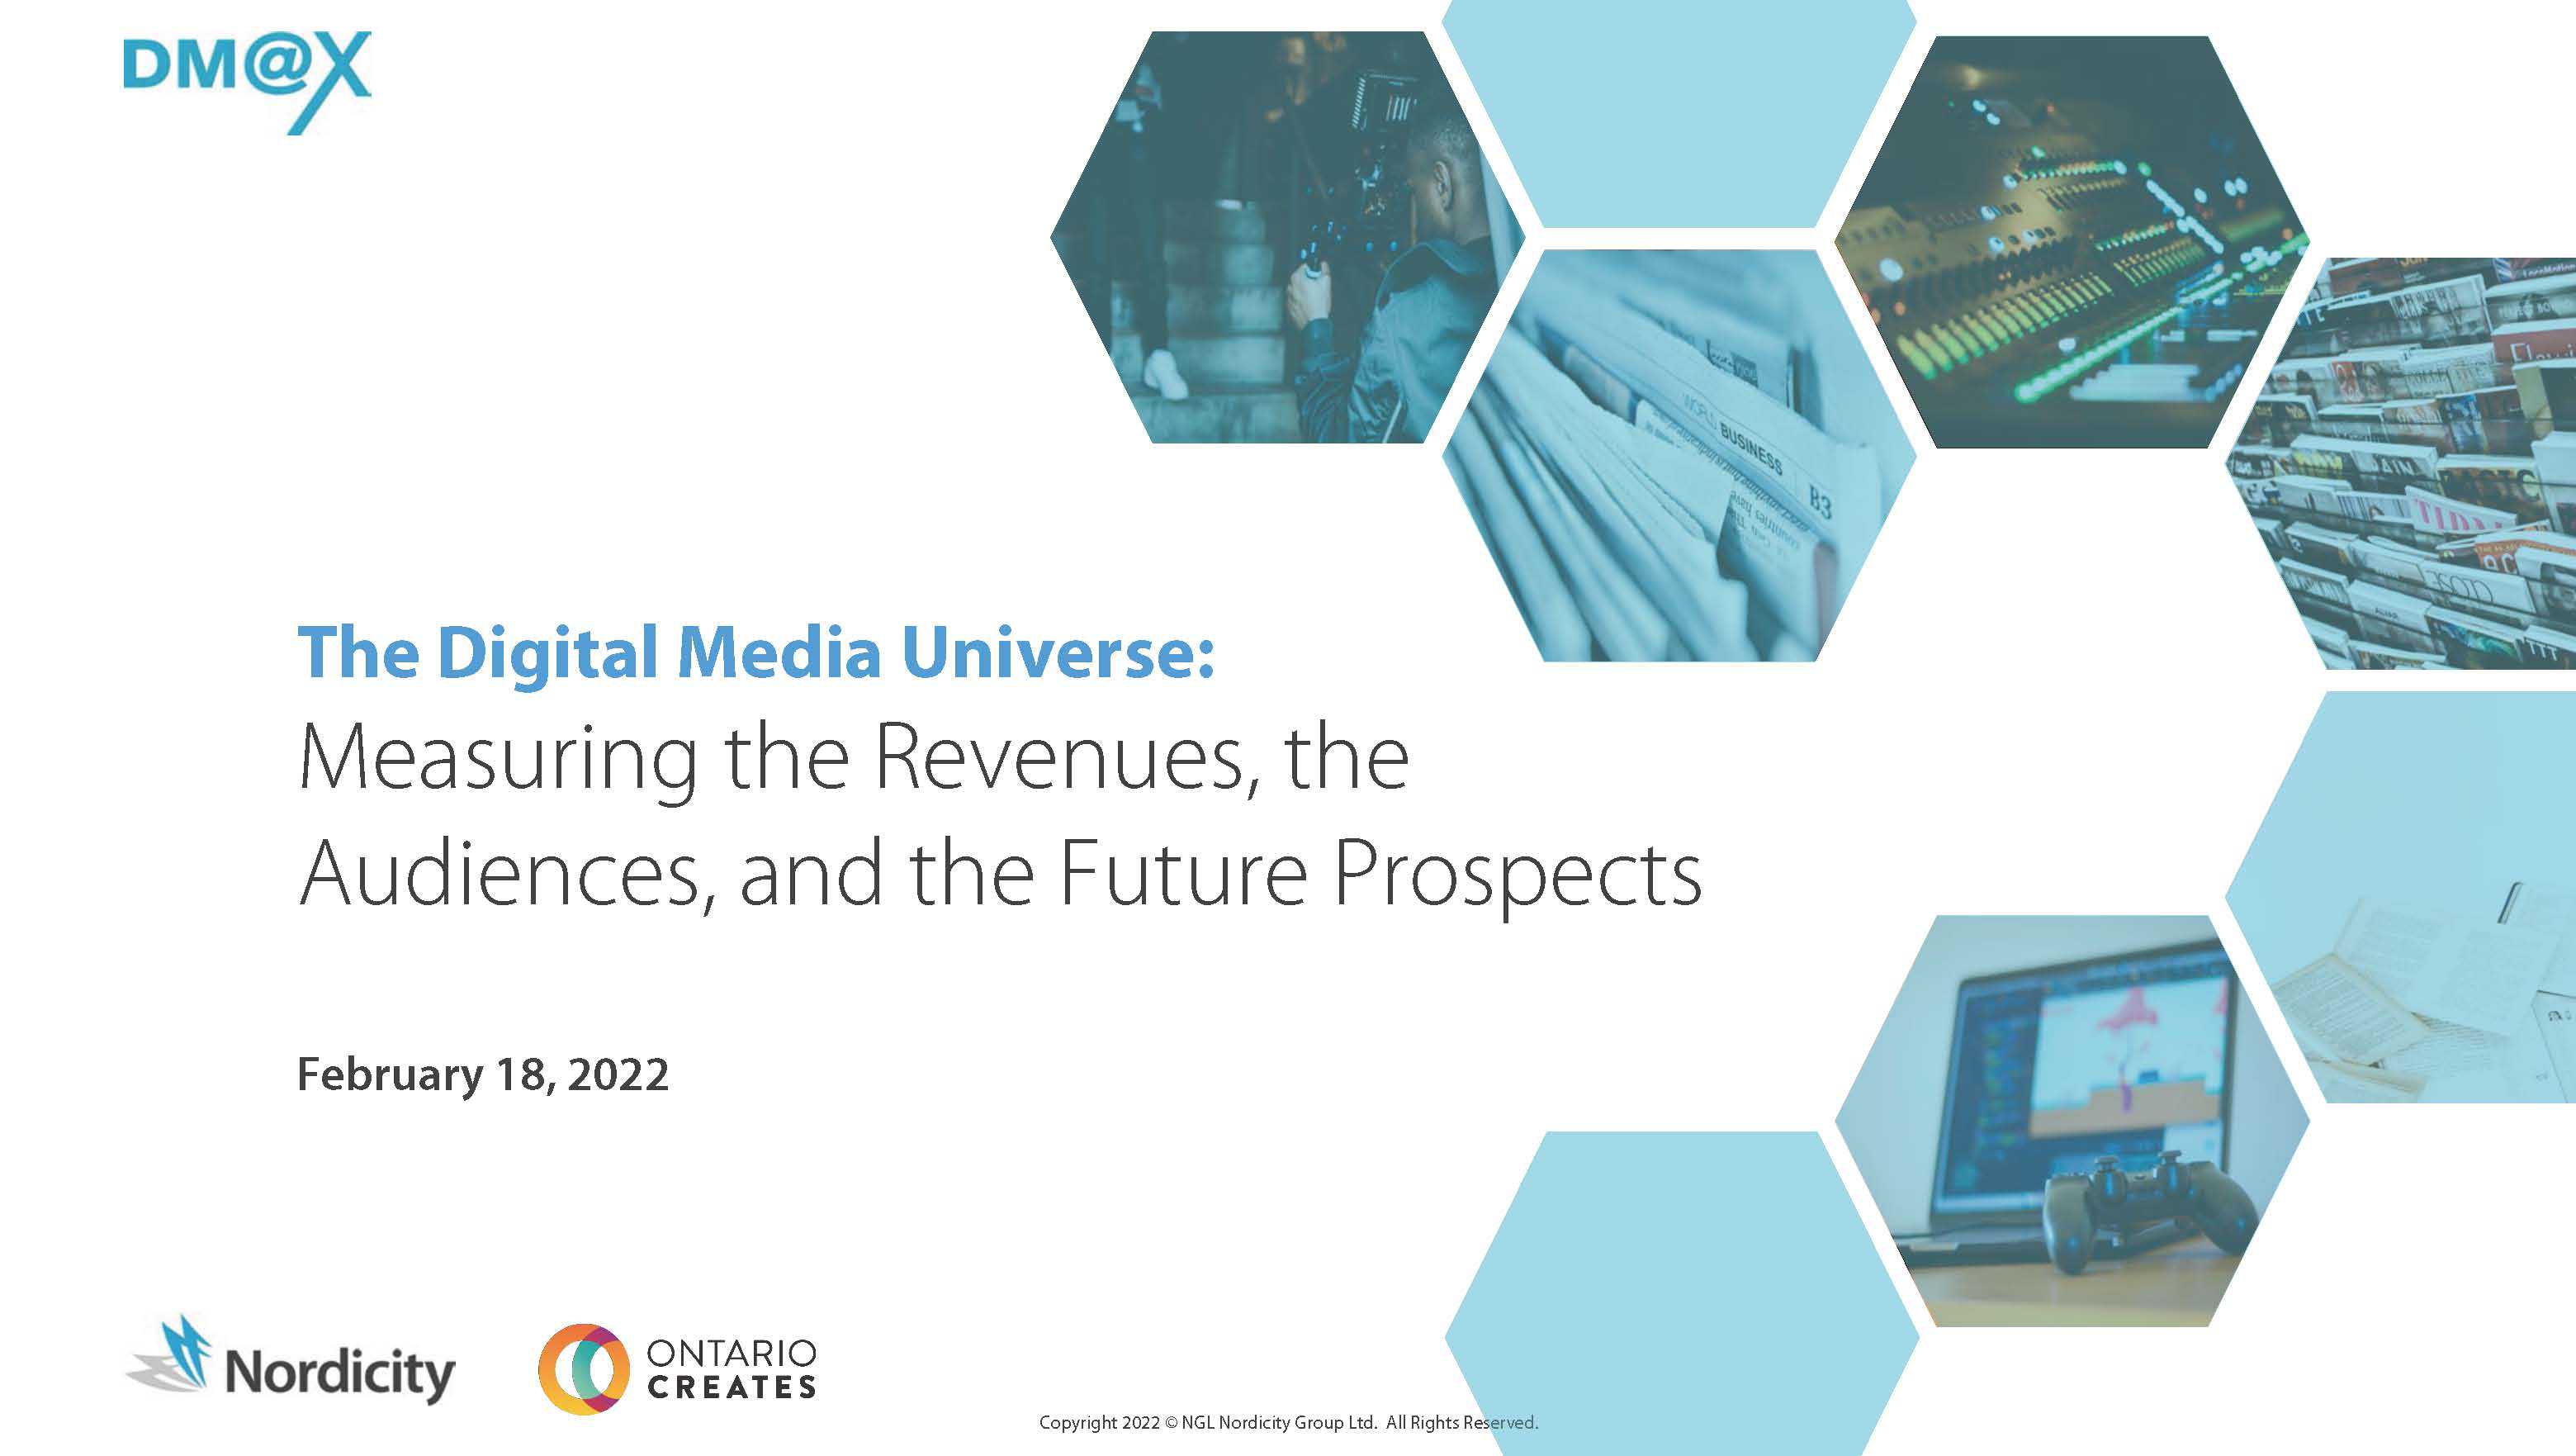 The Digital Media Universe: Measuring the Revenues, Audiences and the Future Prospects